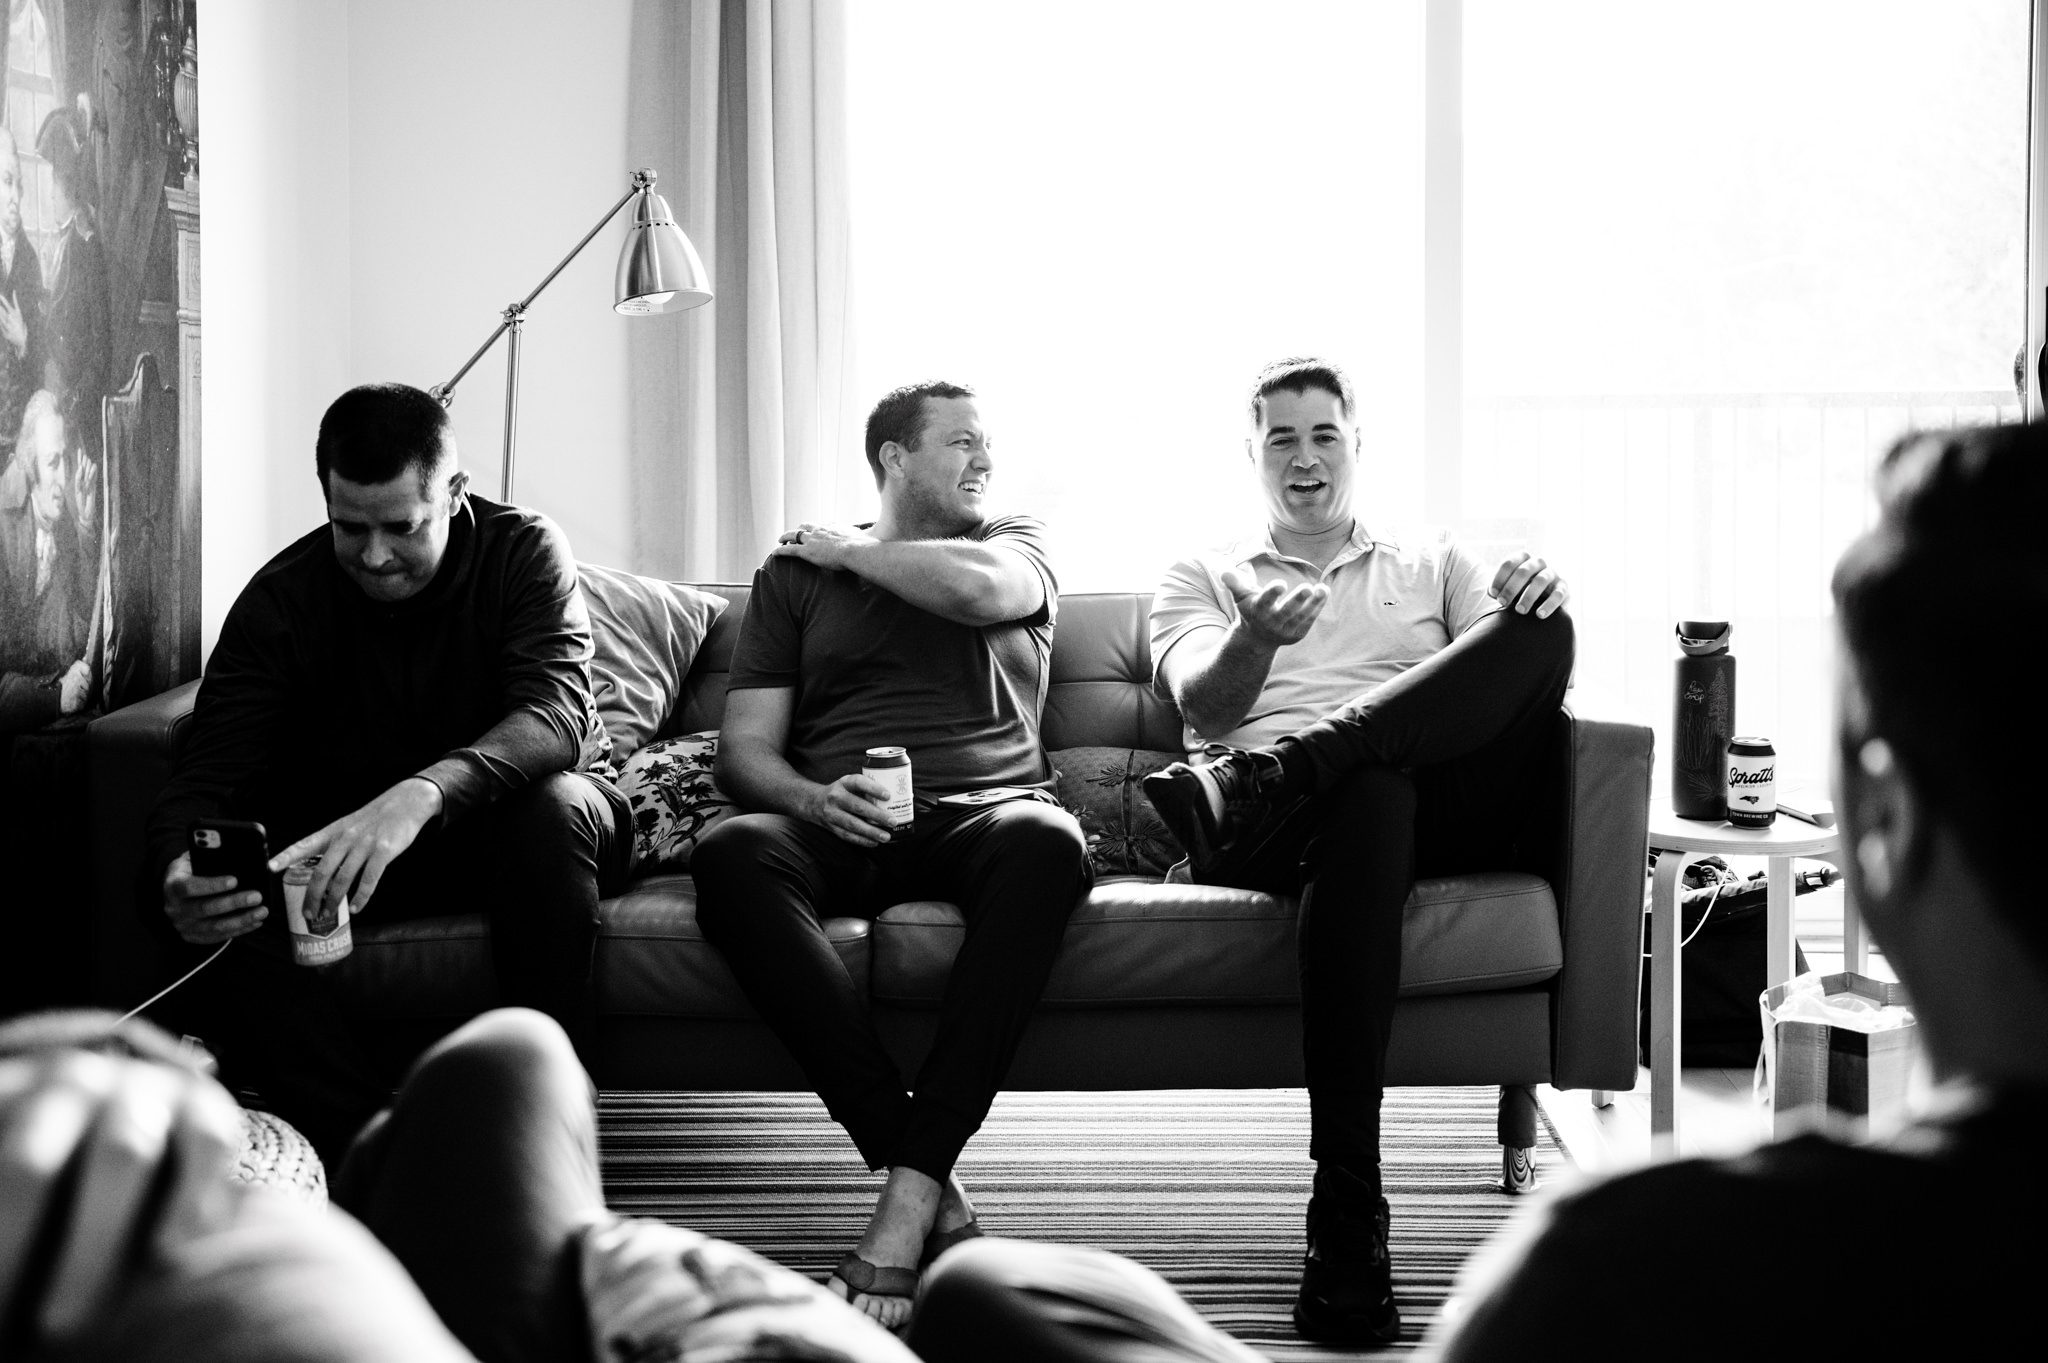 A documentary wedding photographer captures a group of men sitting on a couch at Crest Pavilion.